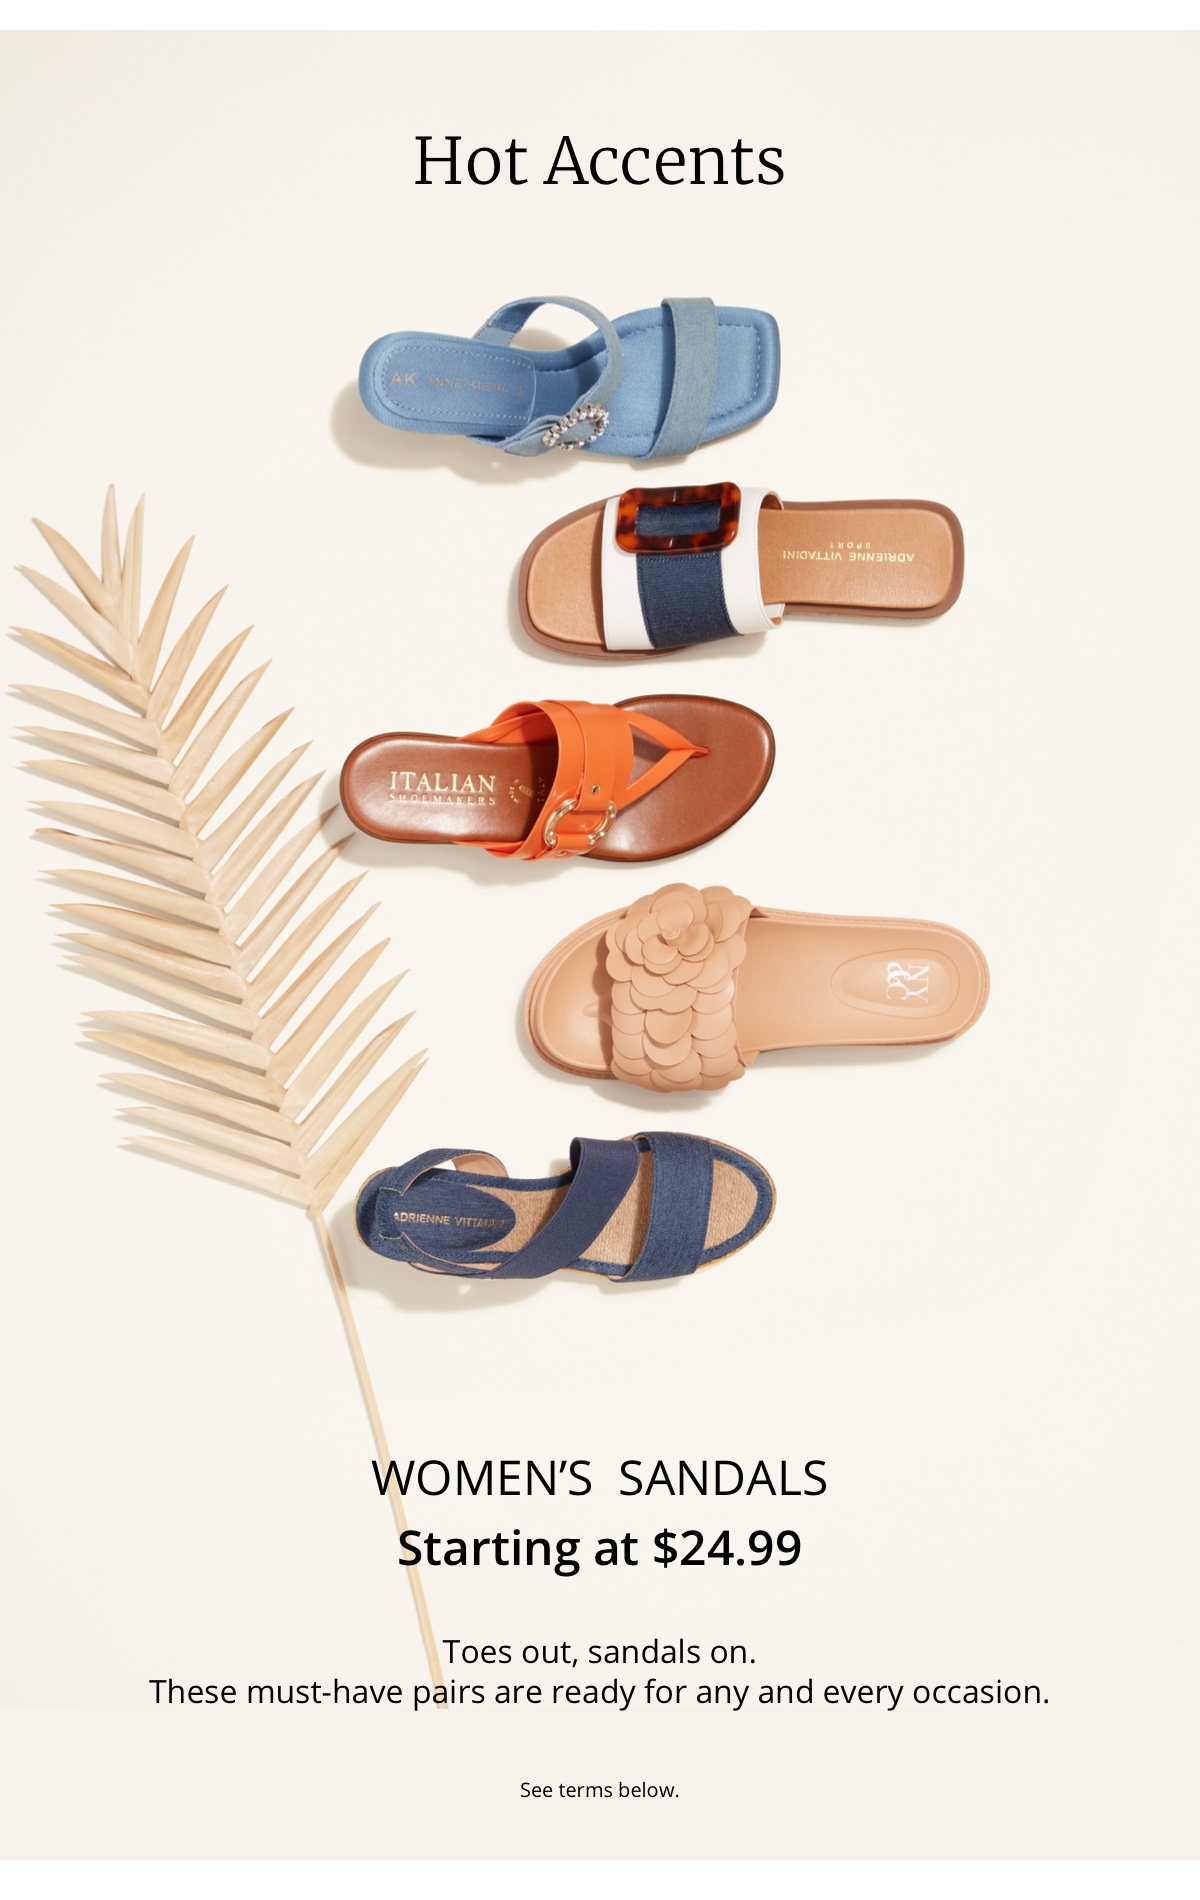 Hot Accents|Womens Sandals|Starting at $24.99|Toes out, sandals on.| These must-have pairs are ready for any and every occasion.|See terms below.